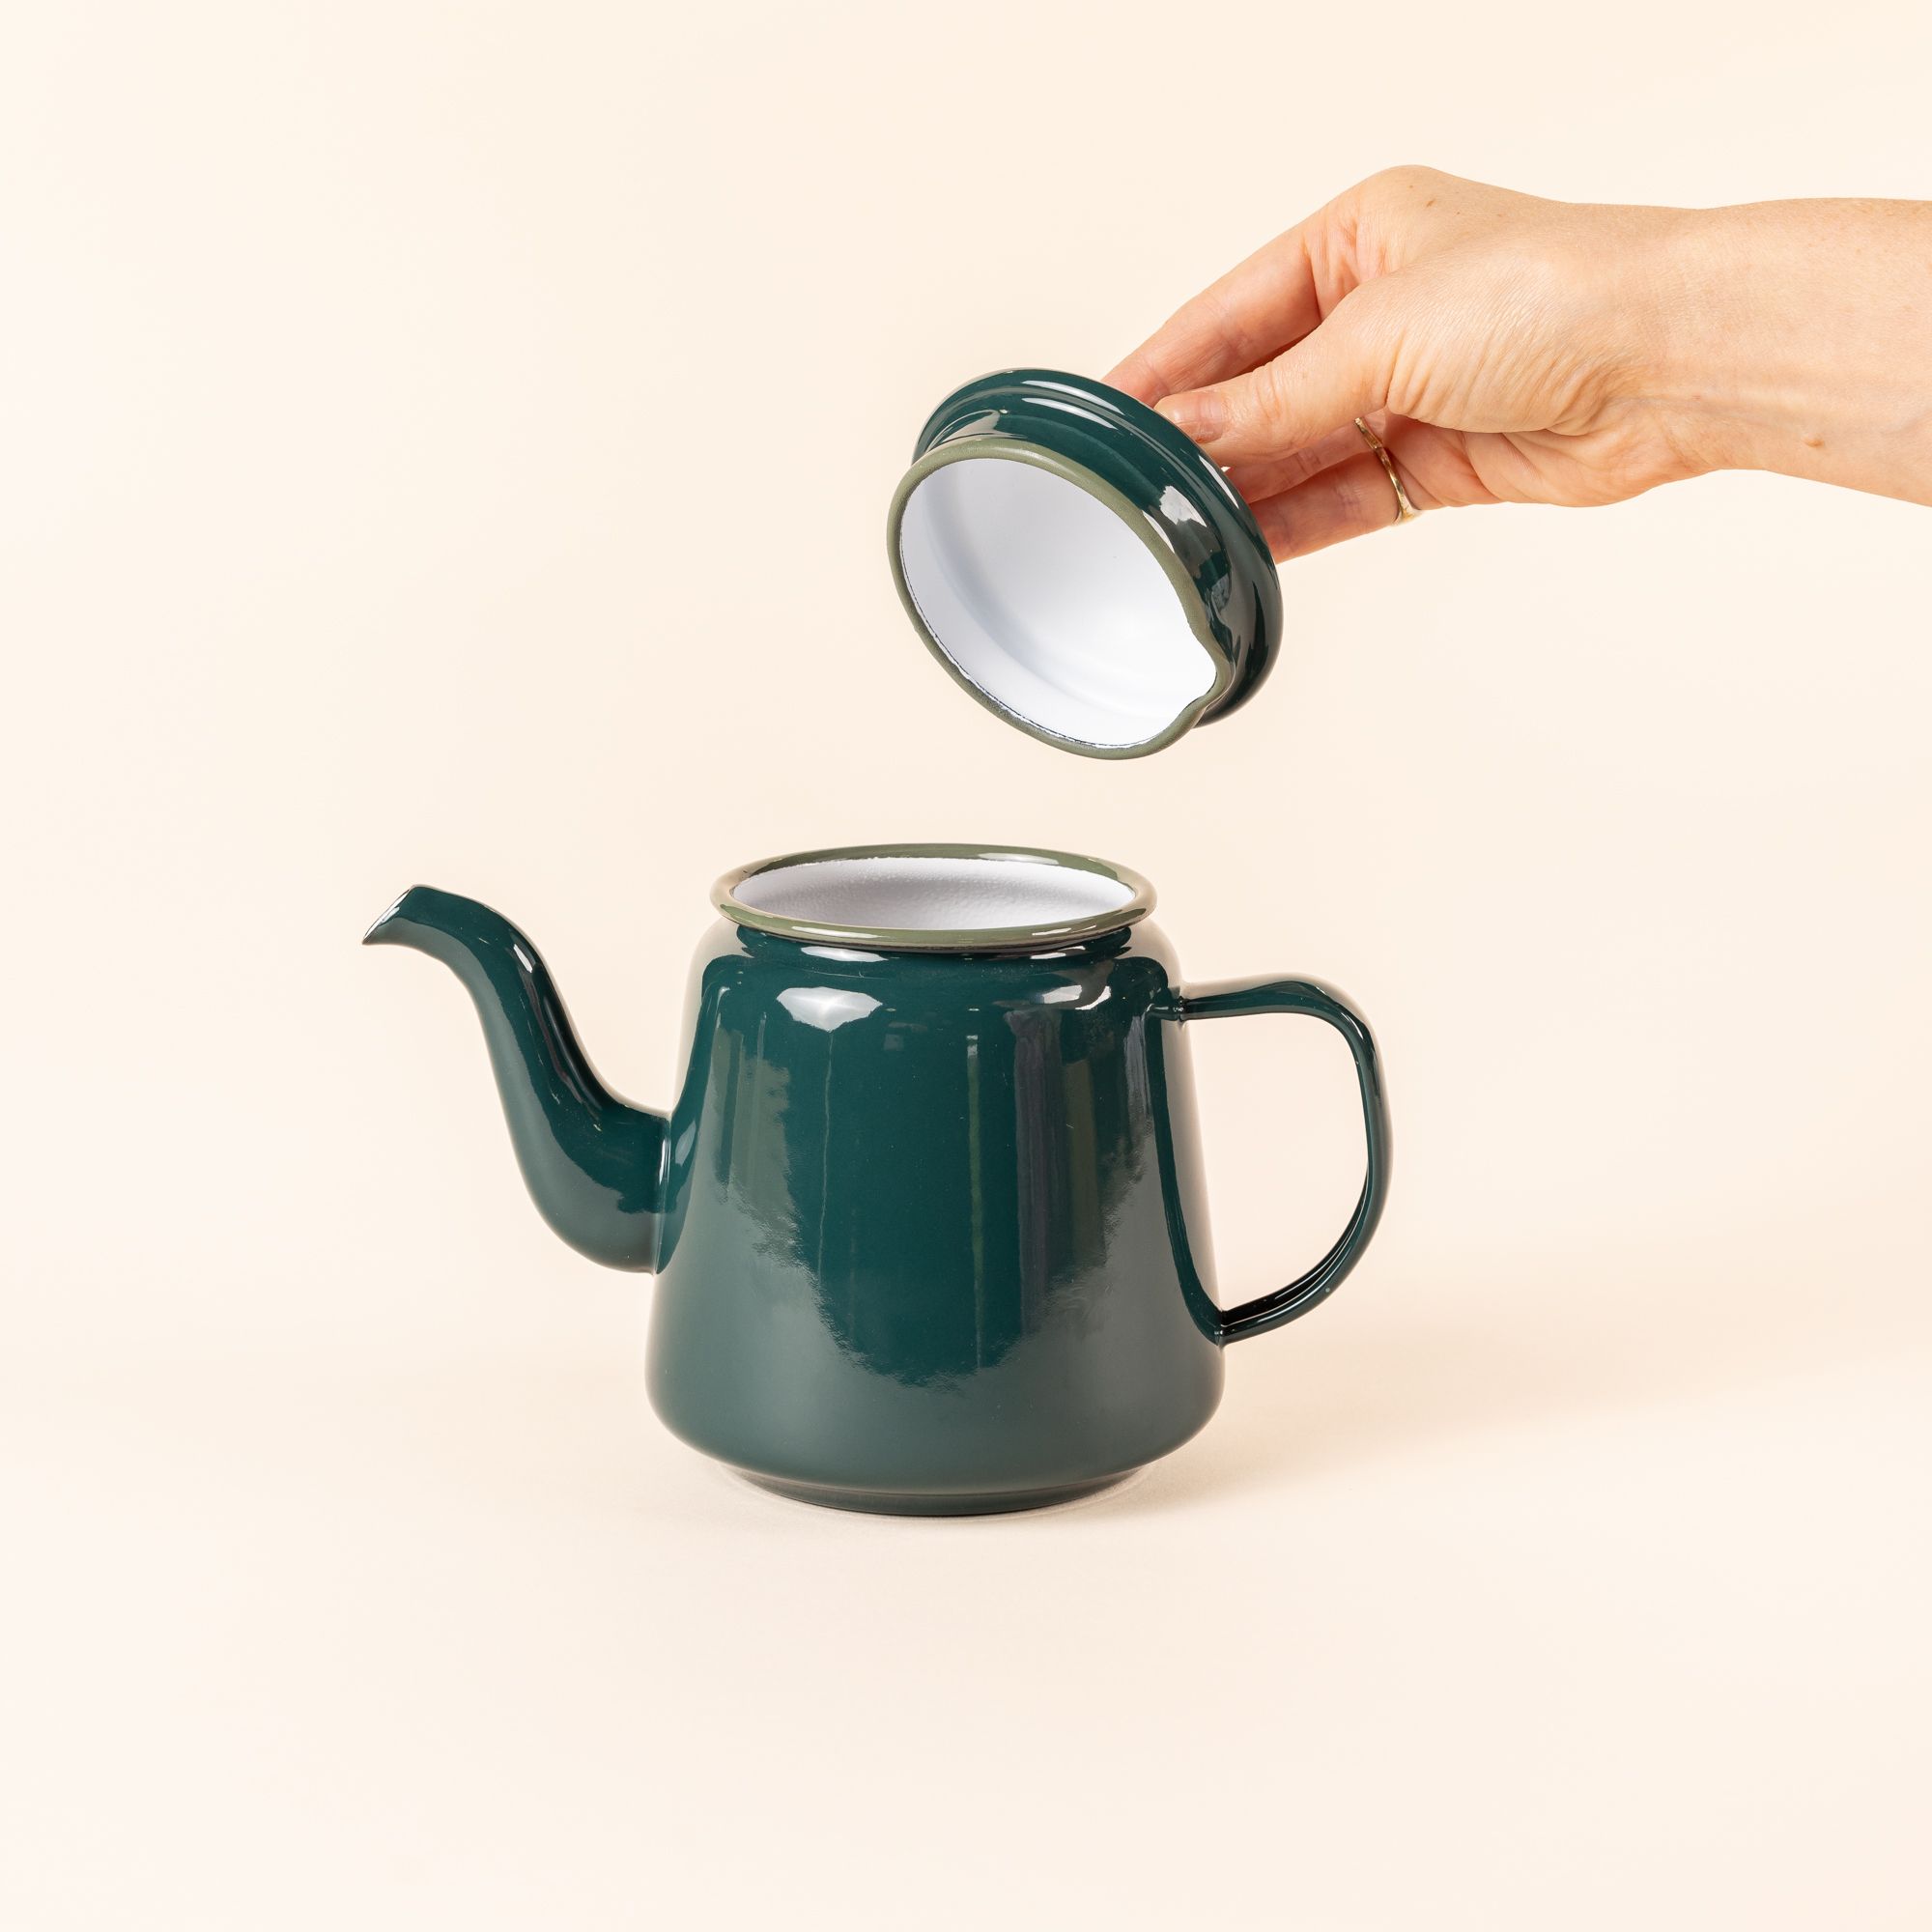 A hand holds the lid above an open enamel teapot. The teapot is deep dark teal enamel with a thin handle, large spout, and simple lid